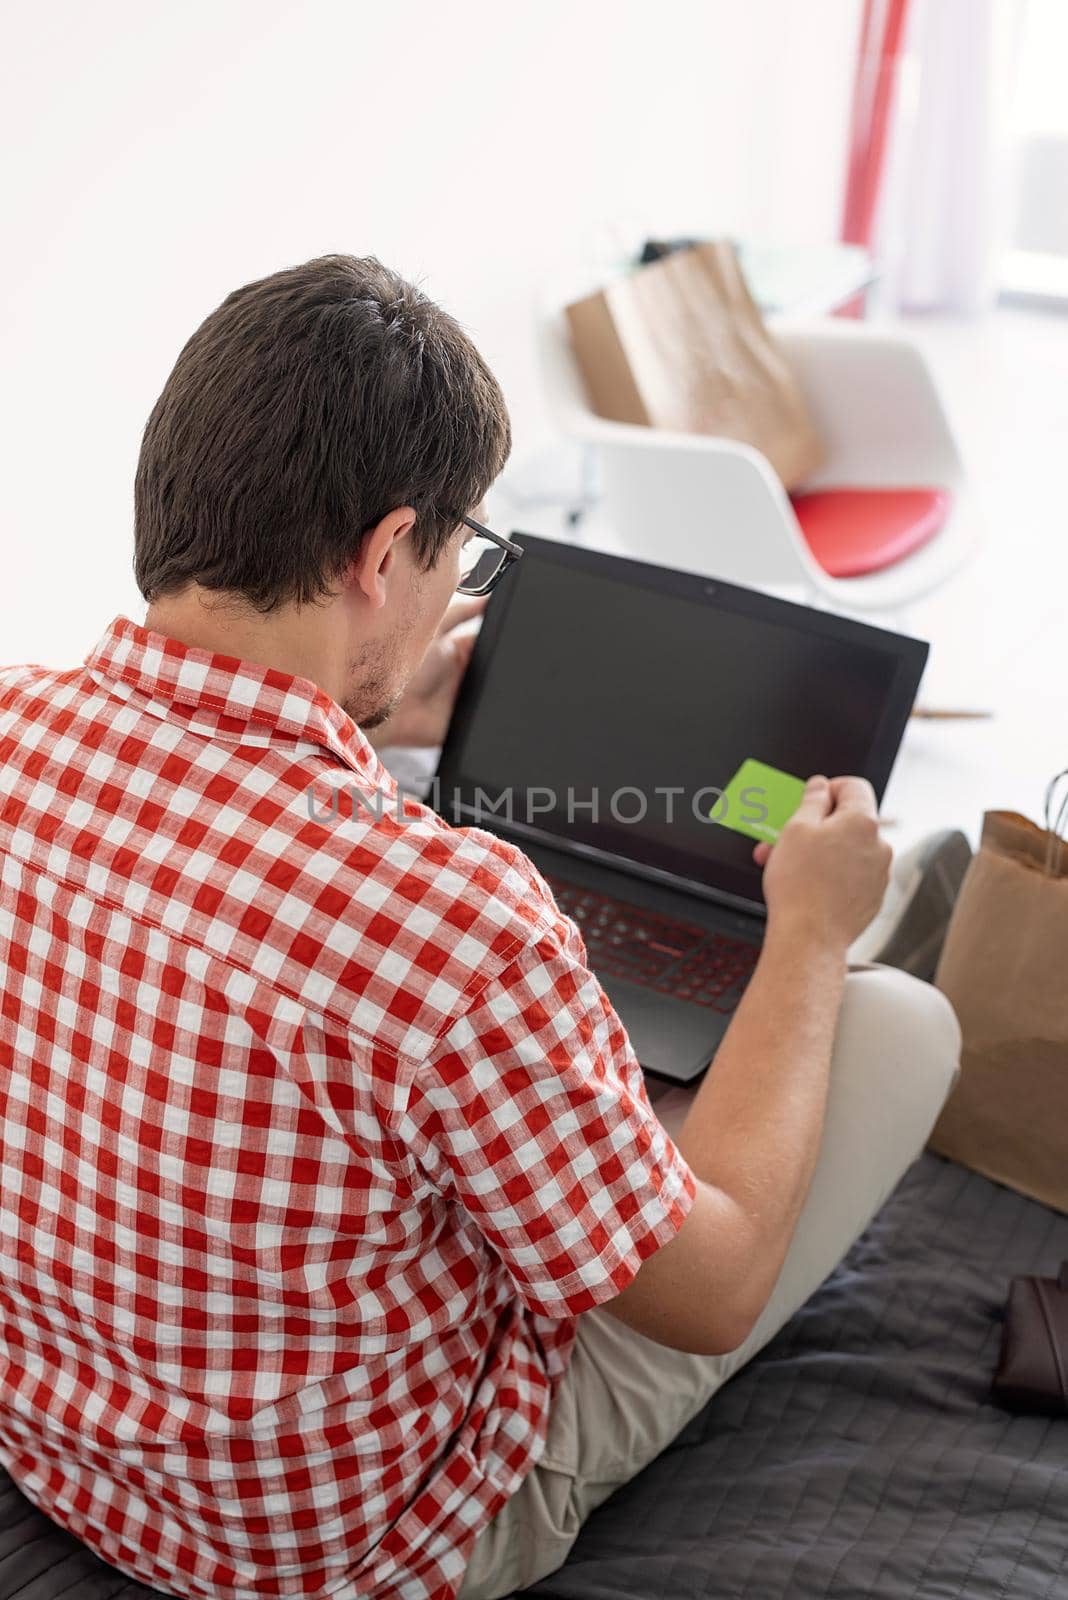 Online shopping concept. Young man sitting on the bed and shopping online using laptop looking at the creadit card, blank screen